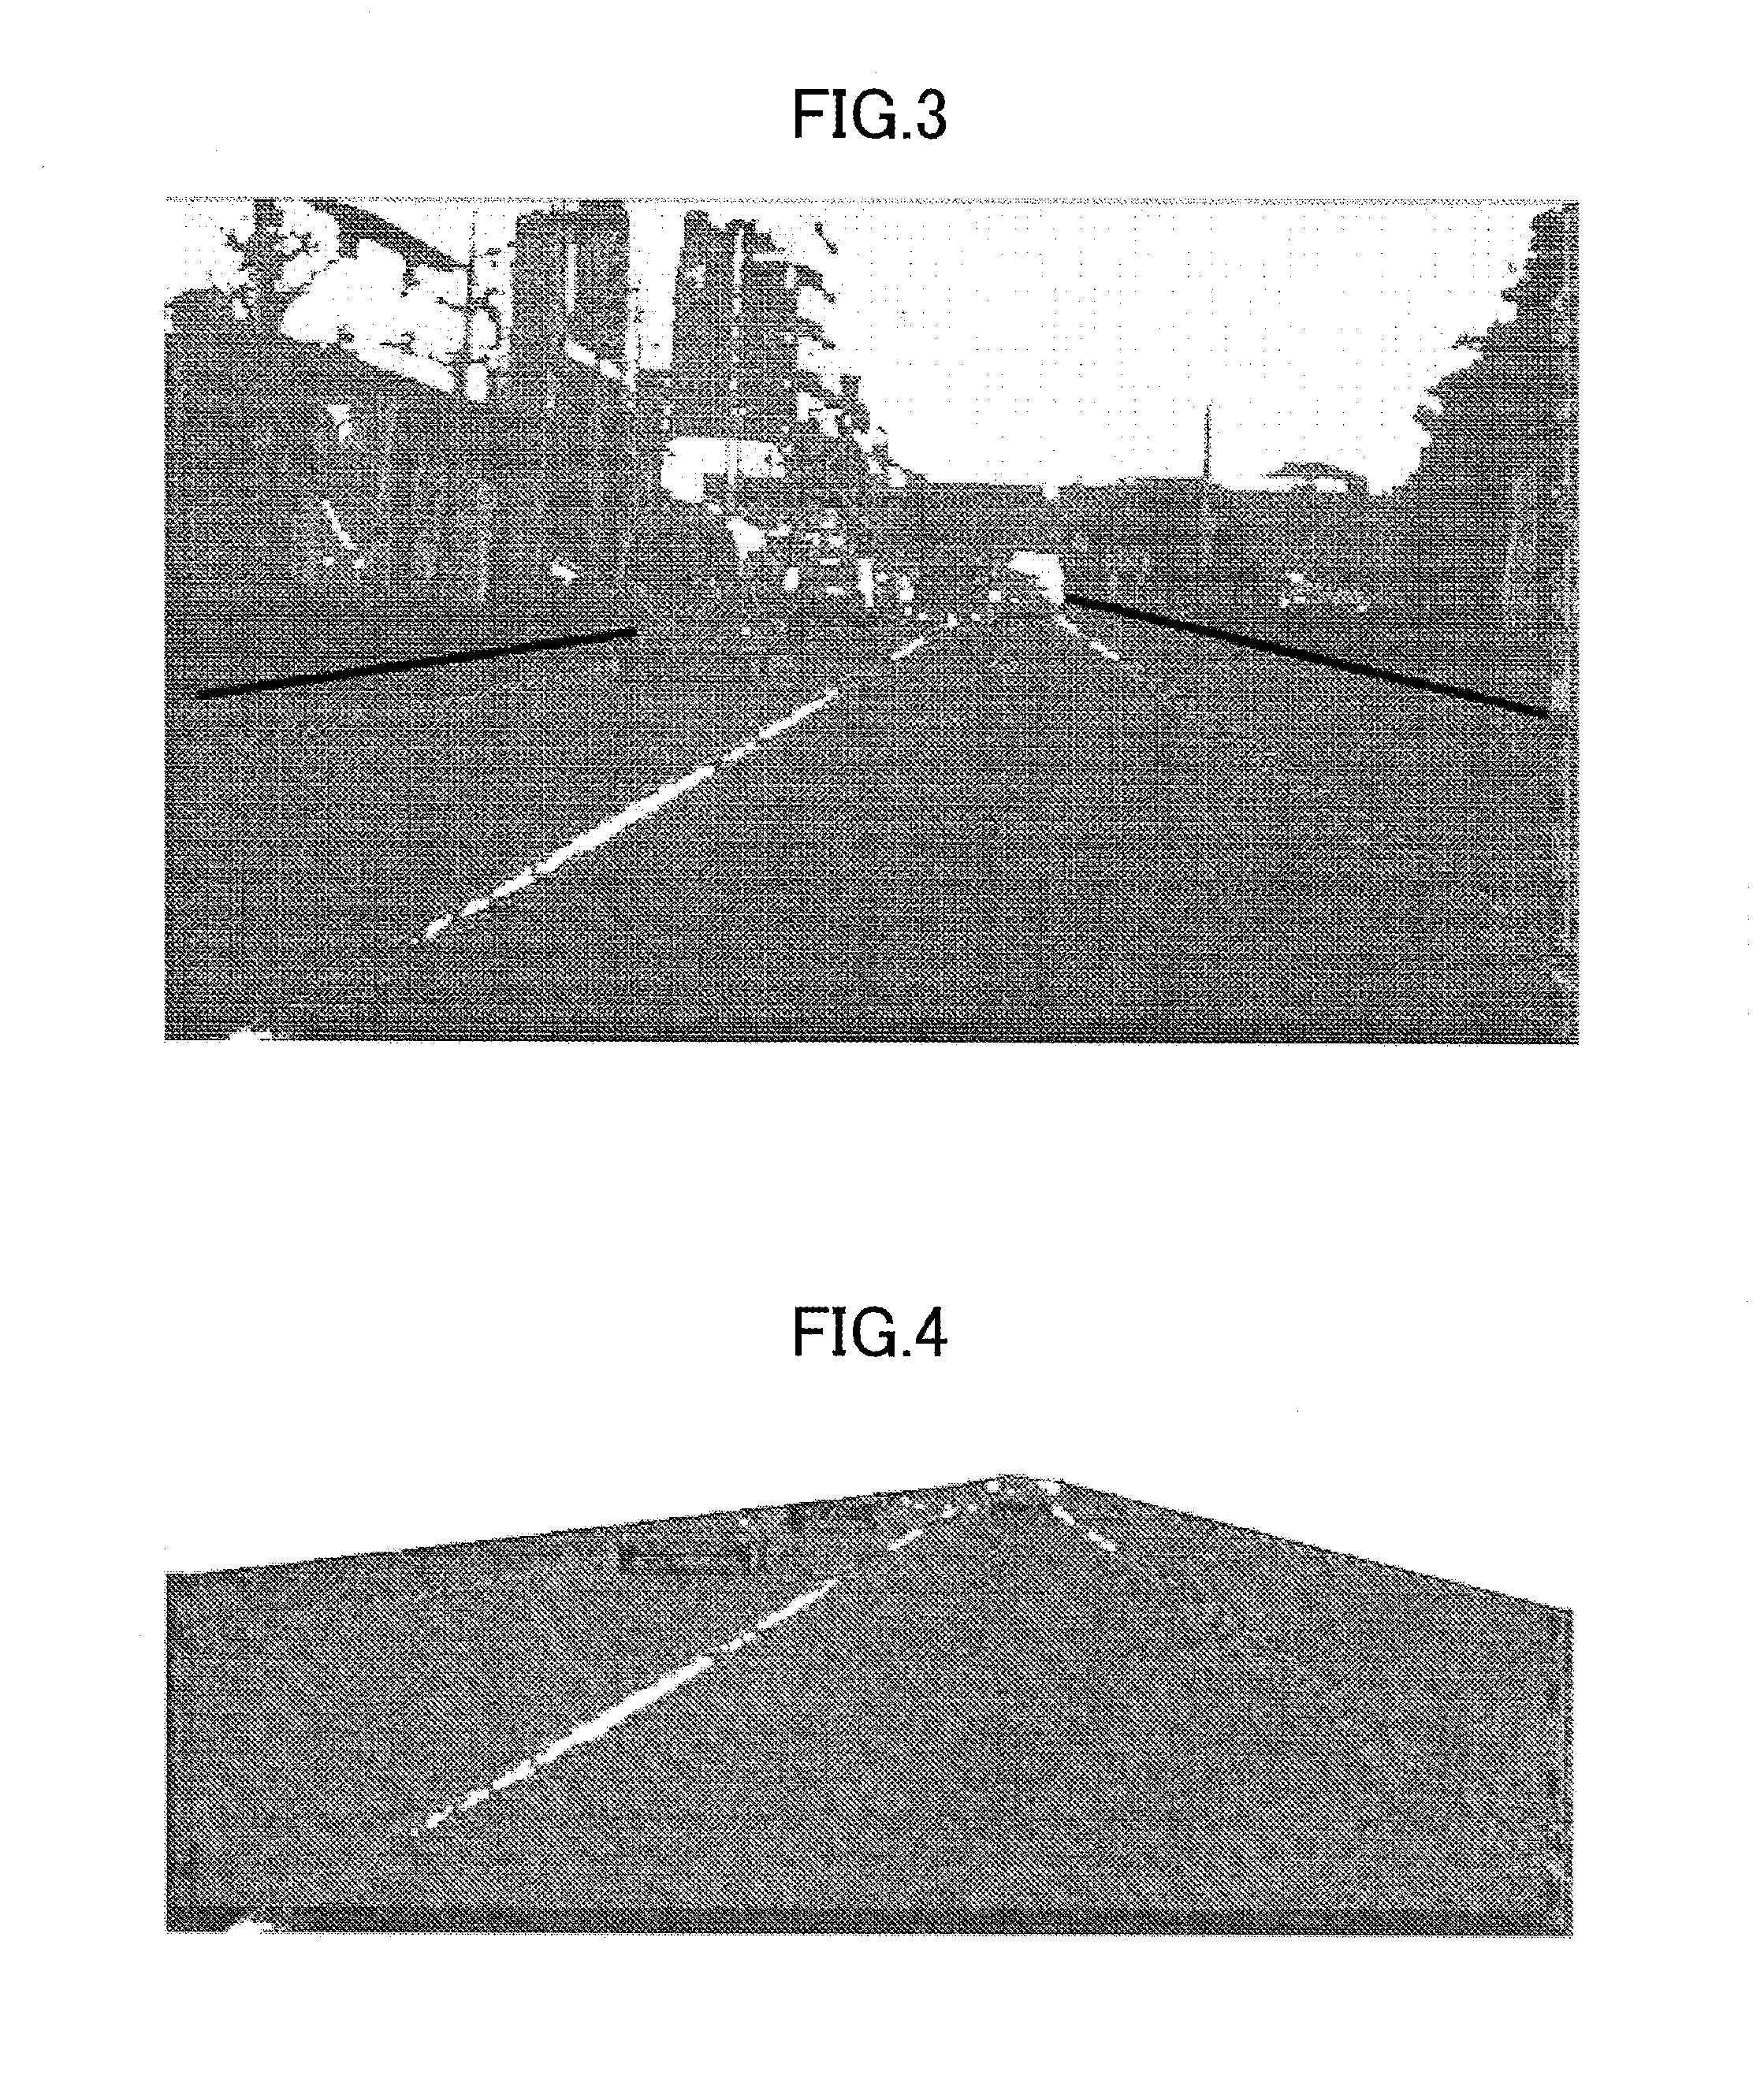 Method and system for detecting vehicle position by employing polarization image